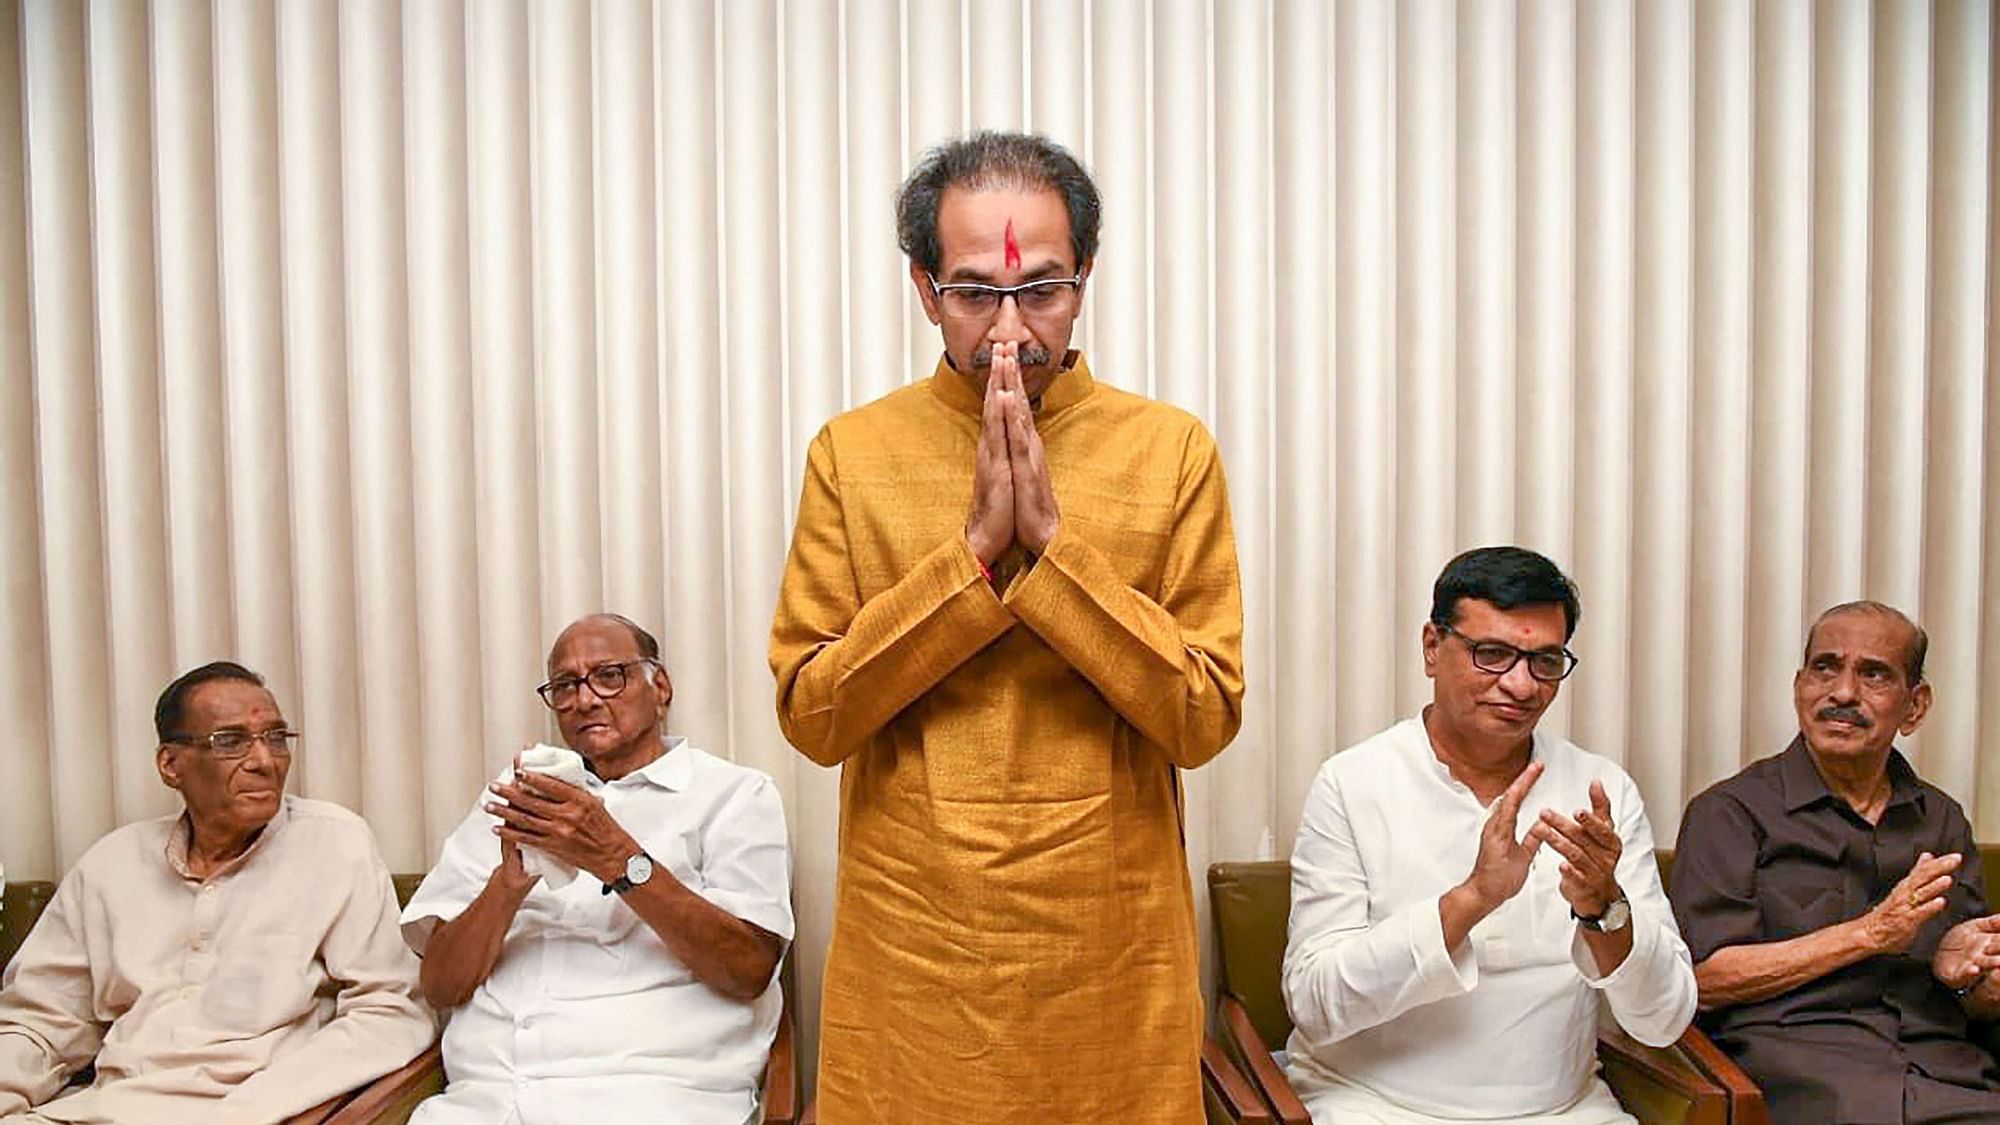 Uddhav Thackeray, the chief ministerial choice of the Congress-NCP-Shiv Sena alliance, will be sworn in on 28 November.